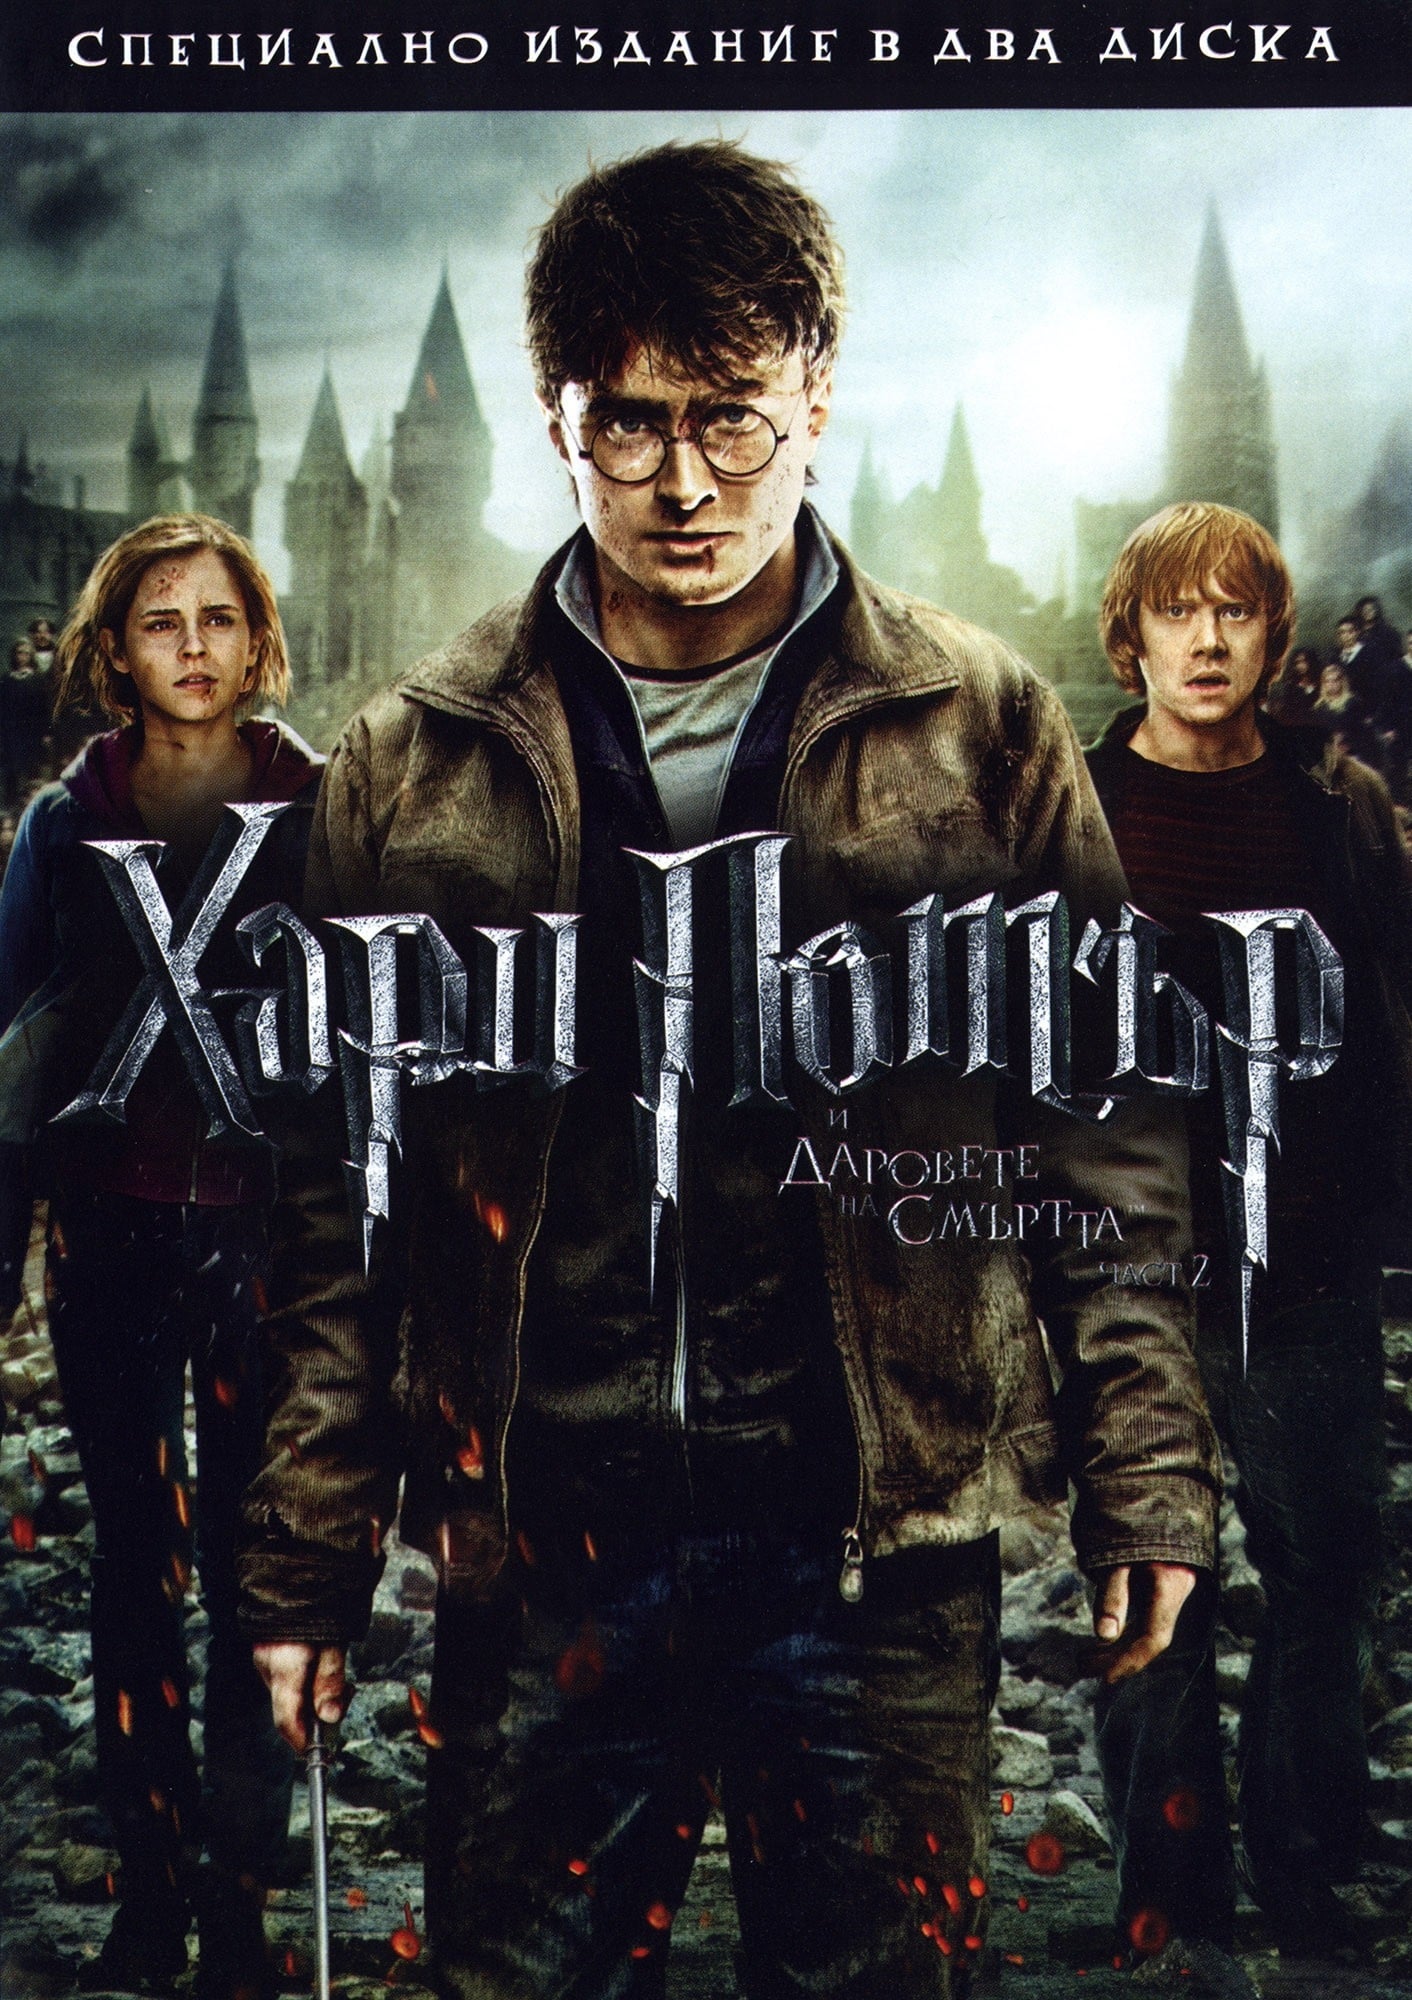 Harry Potter and the Deathly Hallows: Part 2